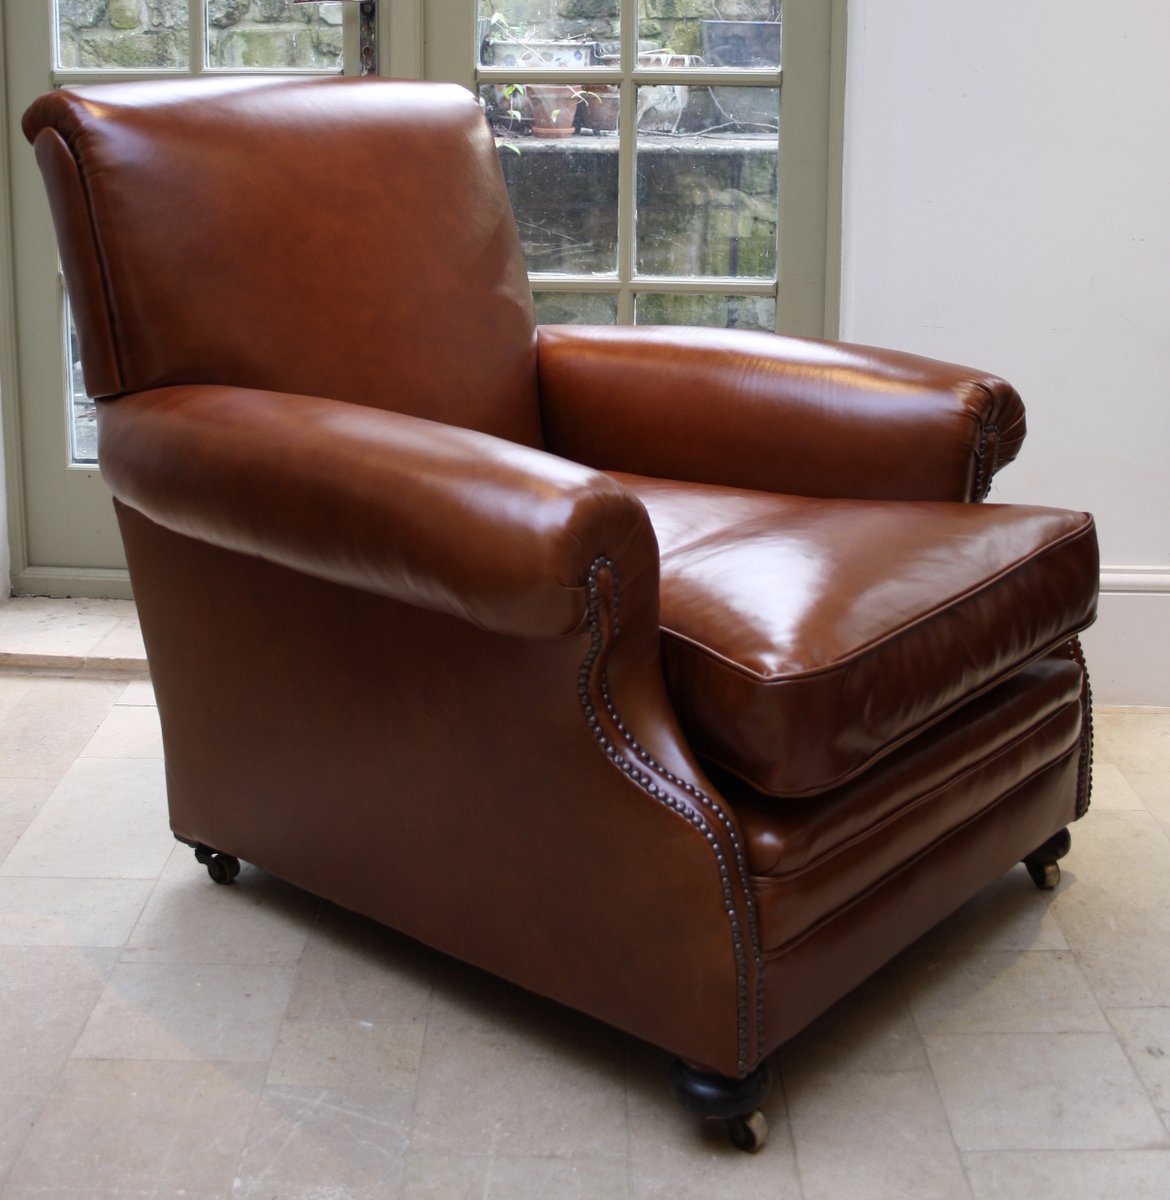 Leather Chairs Of Bath Leatherchairsuk Twitter